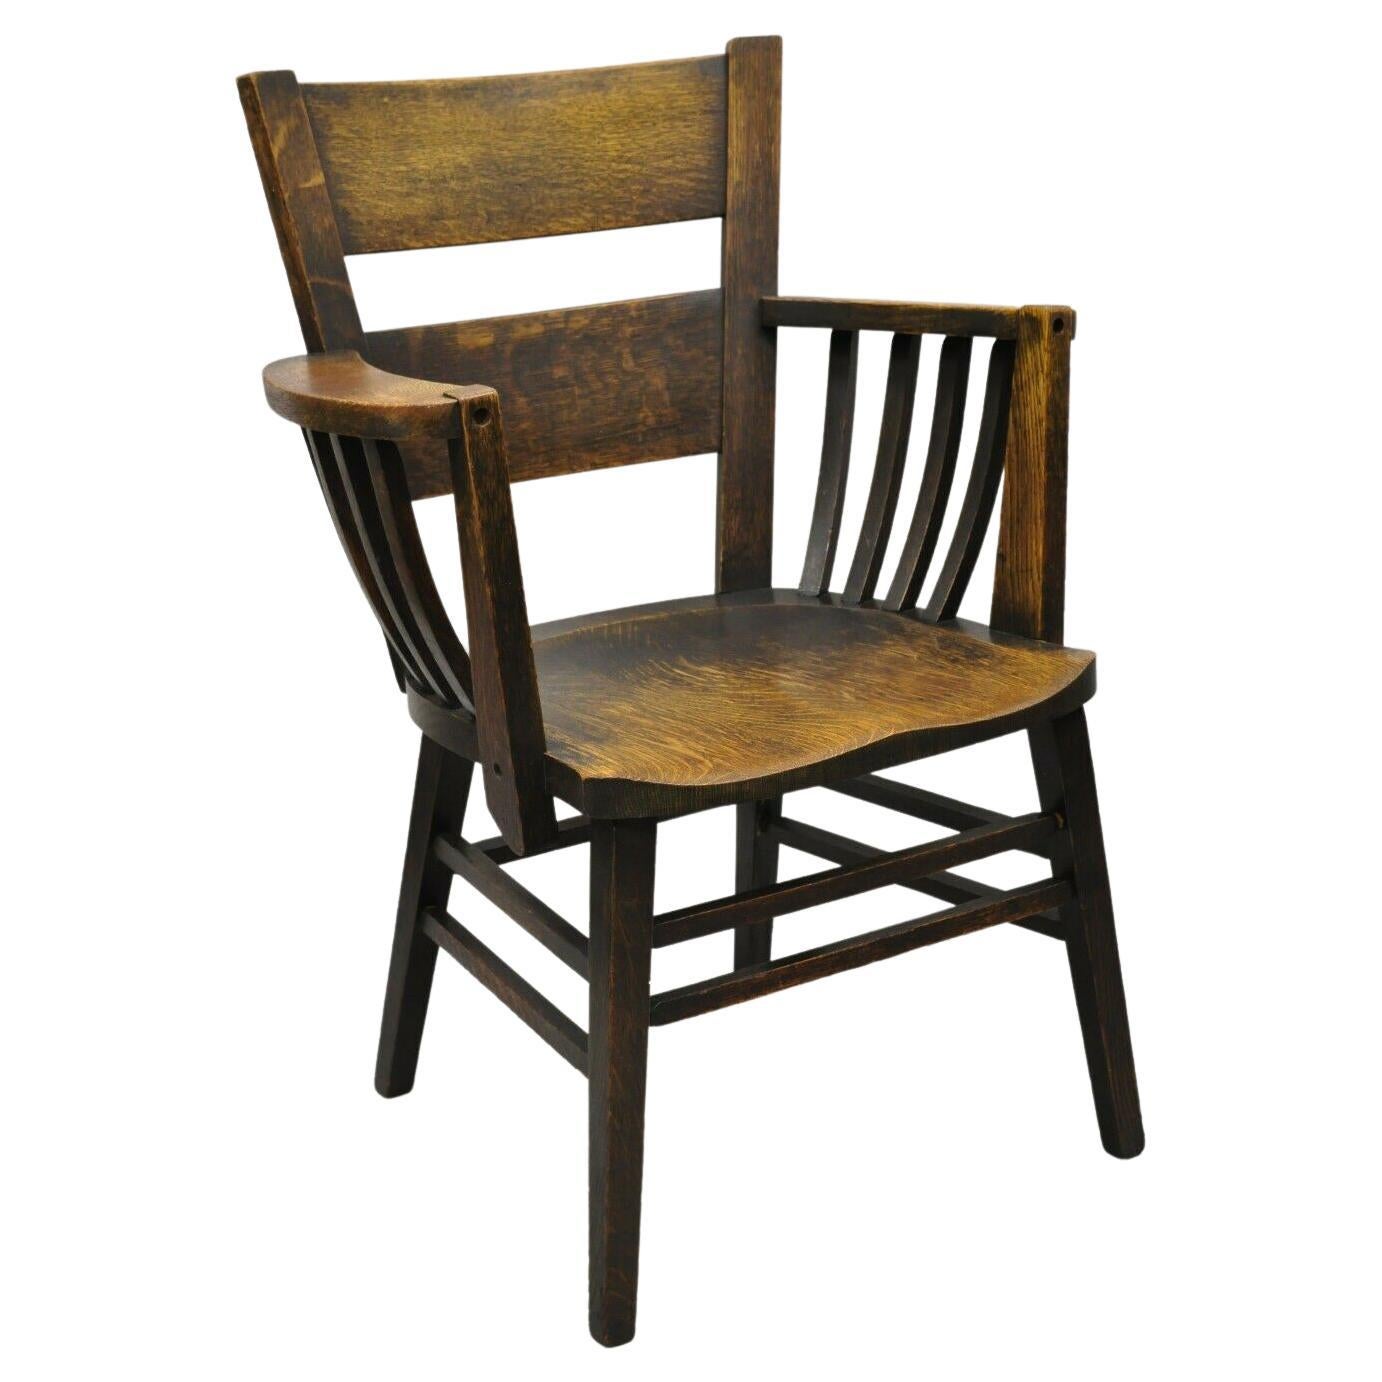 Antique Arts & Crafts Mission Oak Bowed Spindle Plank Seat Arm Chair For Sale